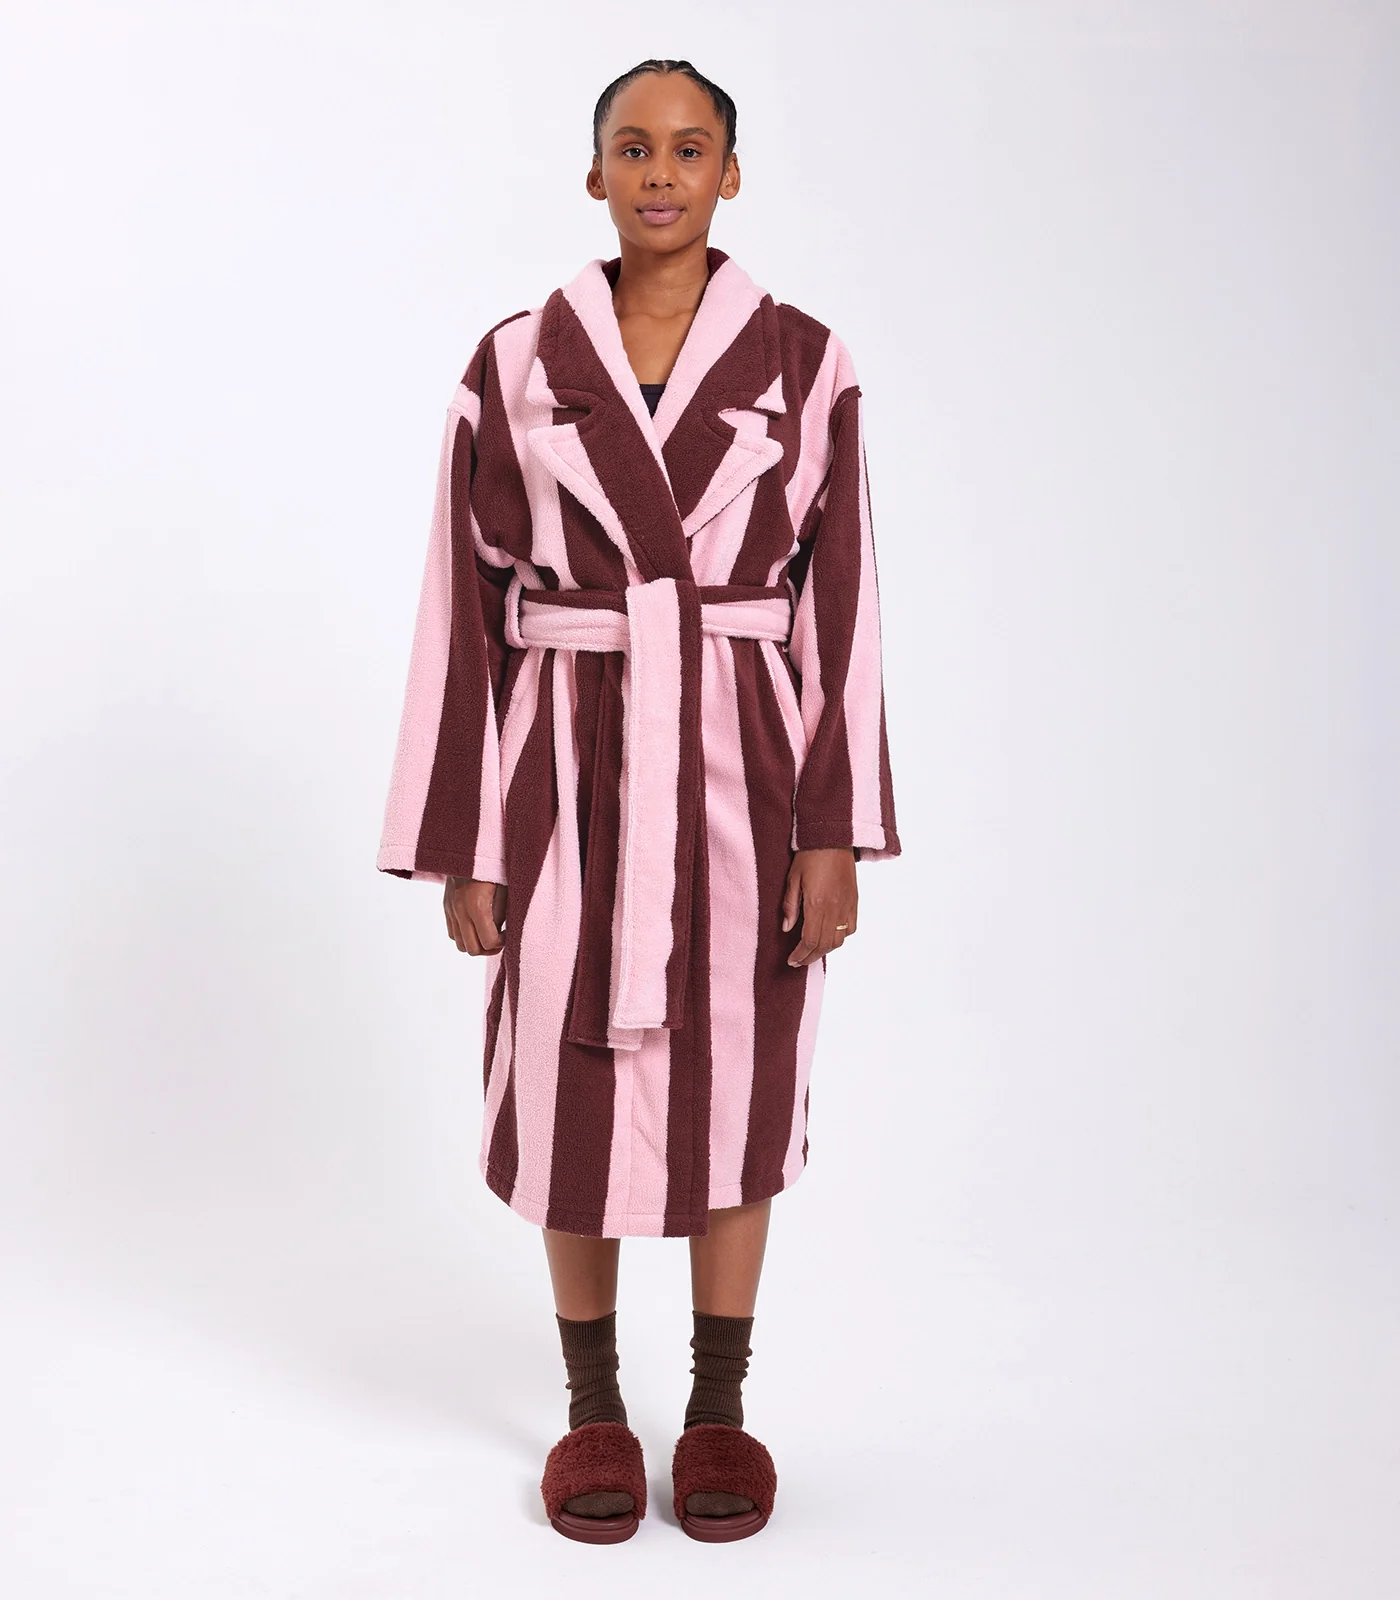 New Classics Collection: Men's Quilted Dressing Gown | Baturina Homewear